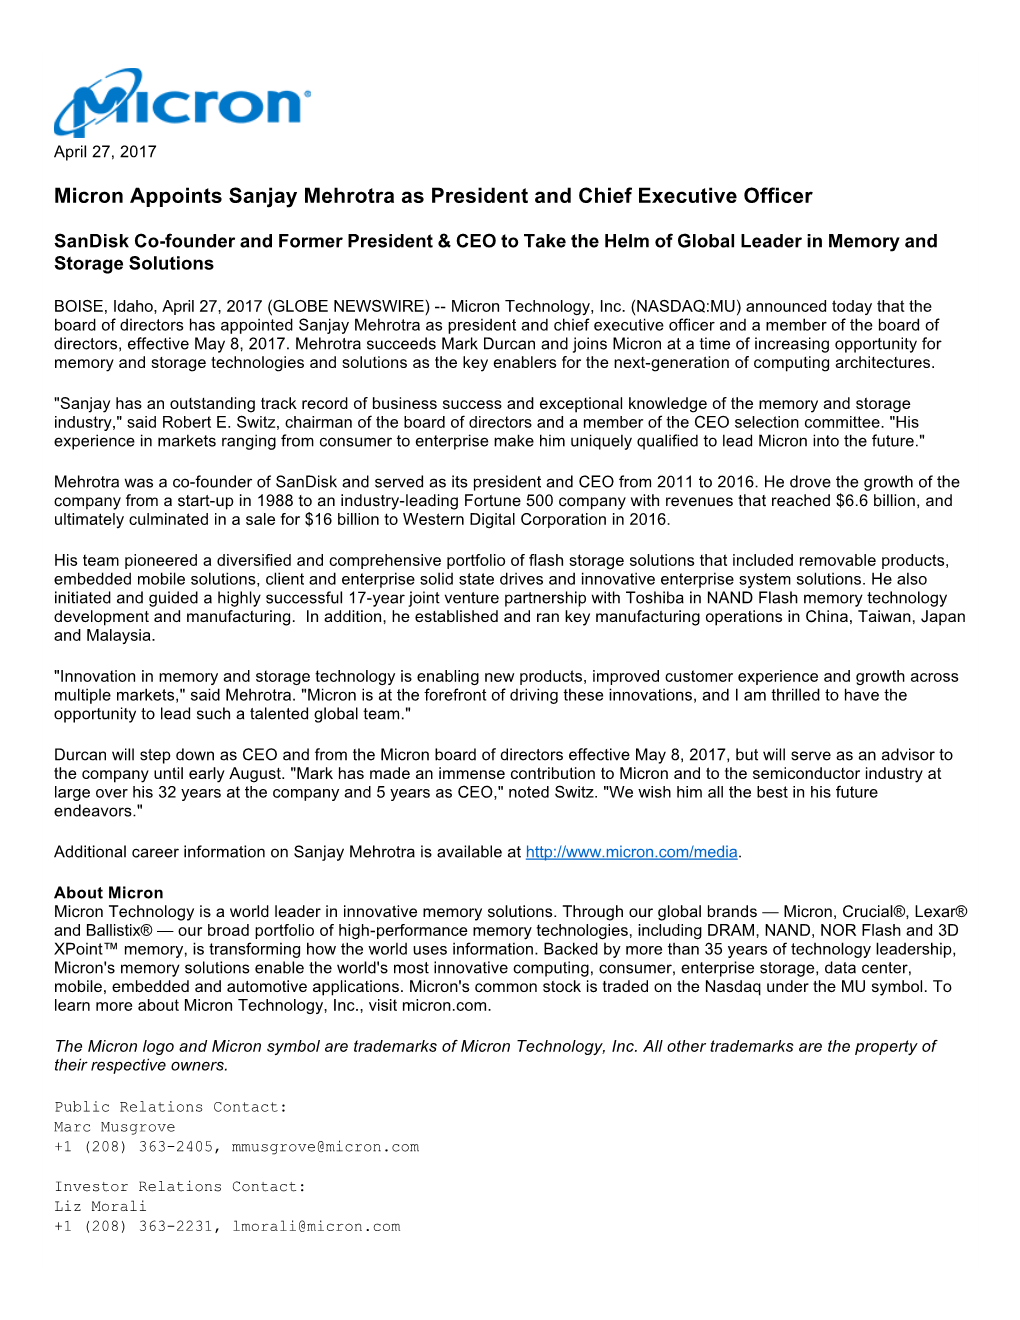 Micron Appoints Sanjay Mehrotra As President and Chief Executive Officer